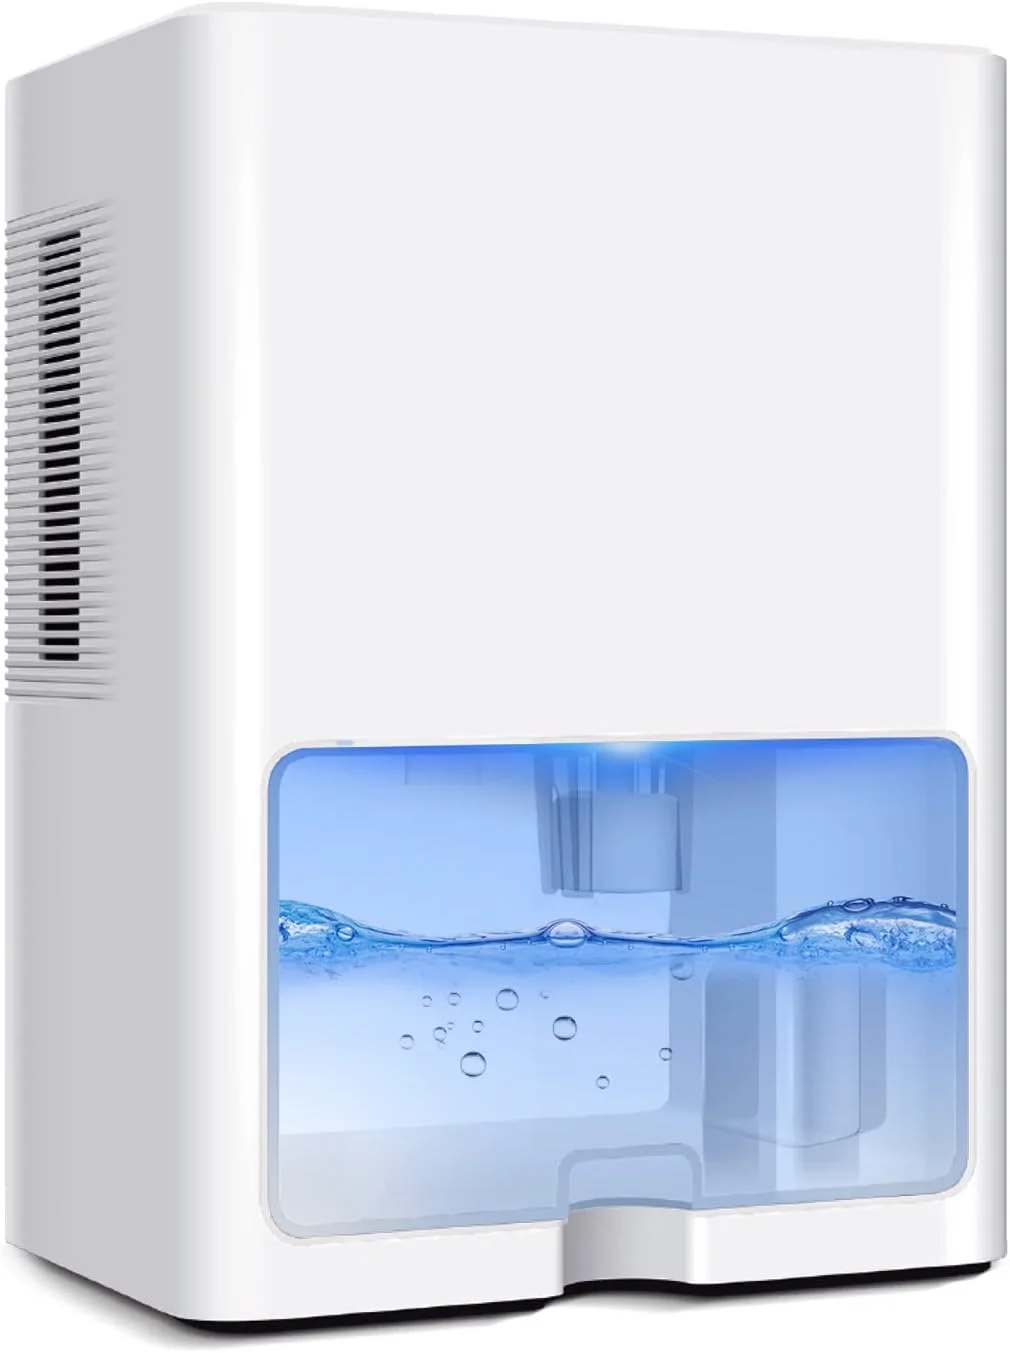 

136oz Dehumidifier for Home, 4000ml Water Tank Capacity, 5300 Cubic Feet ft Portable Quiet Small Dehumidifier with Auto-Off for